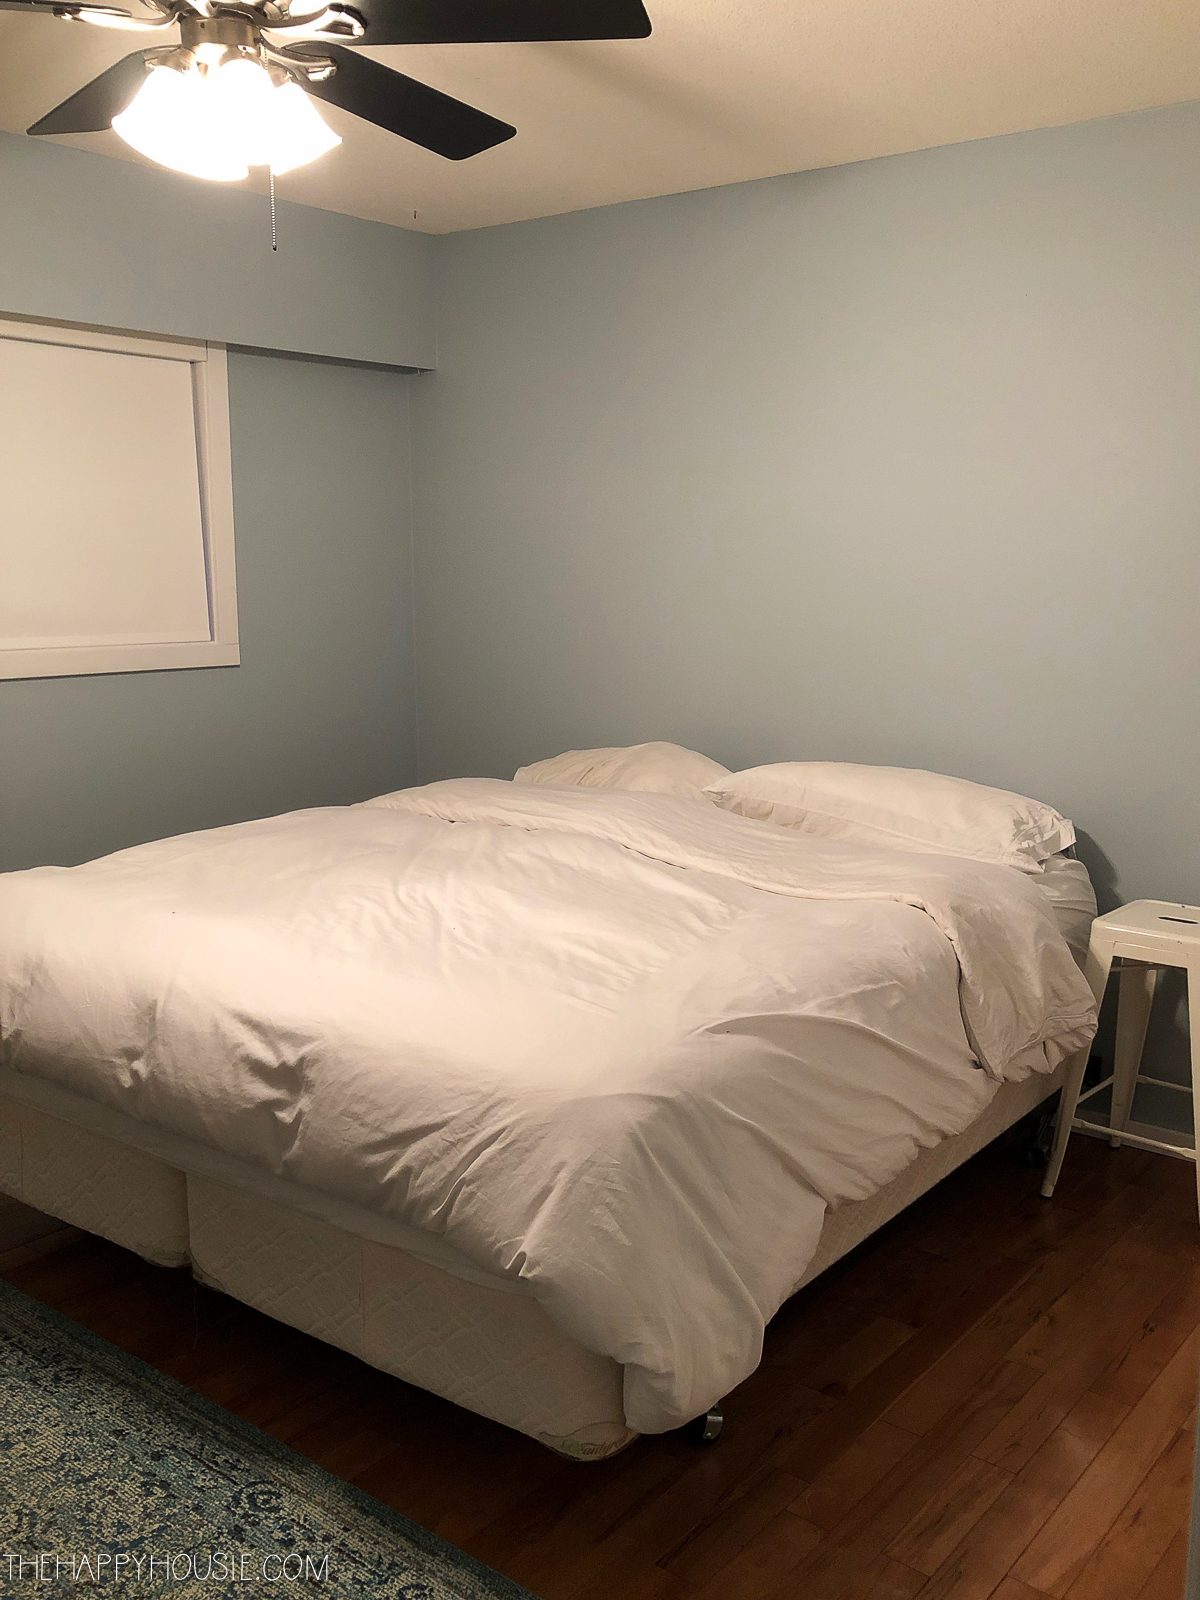 A bed in the middle of a bedroom with no decor.